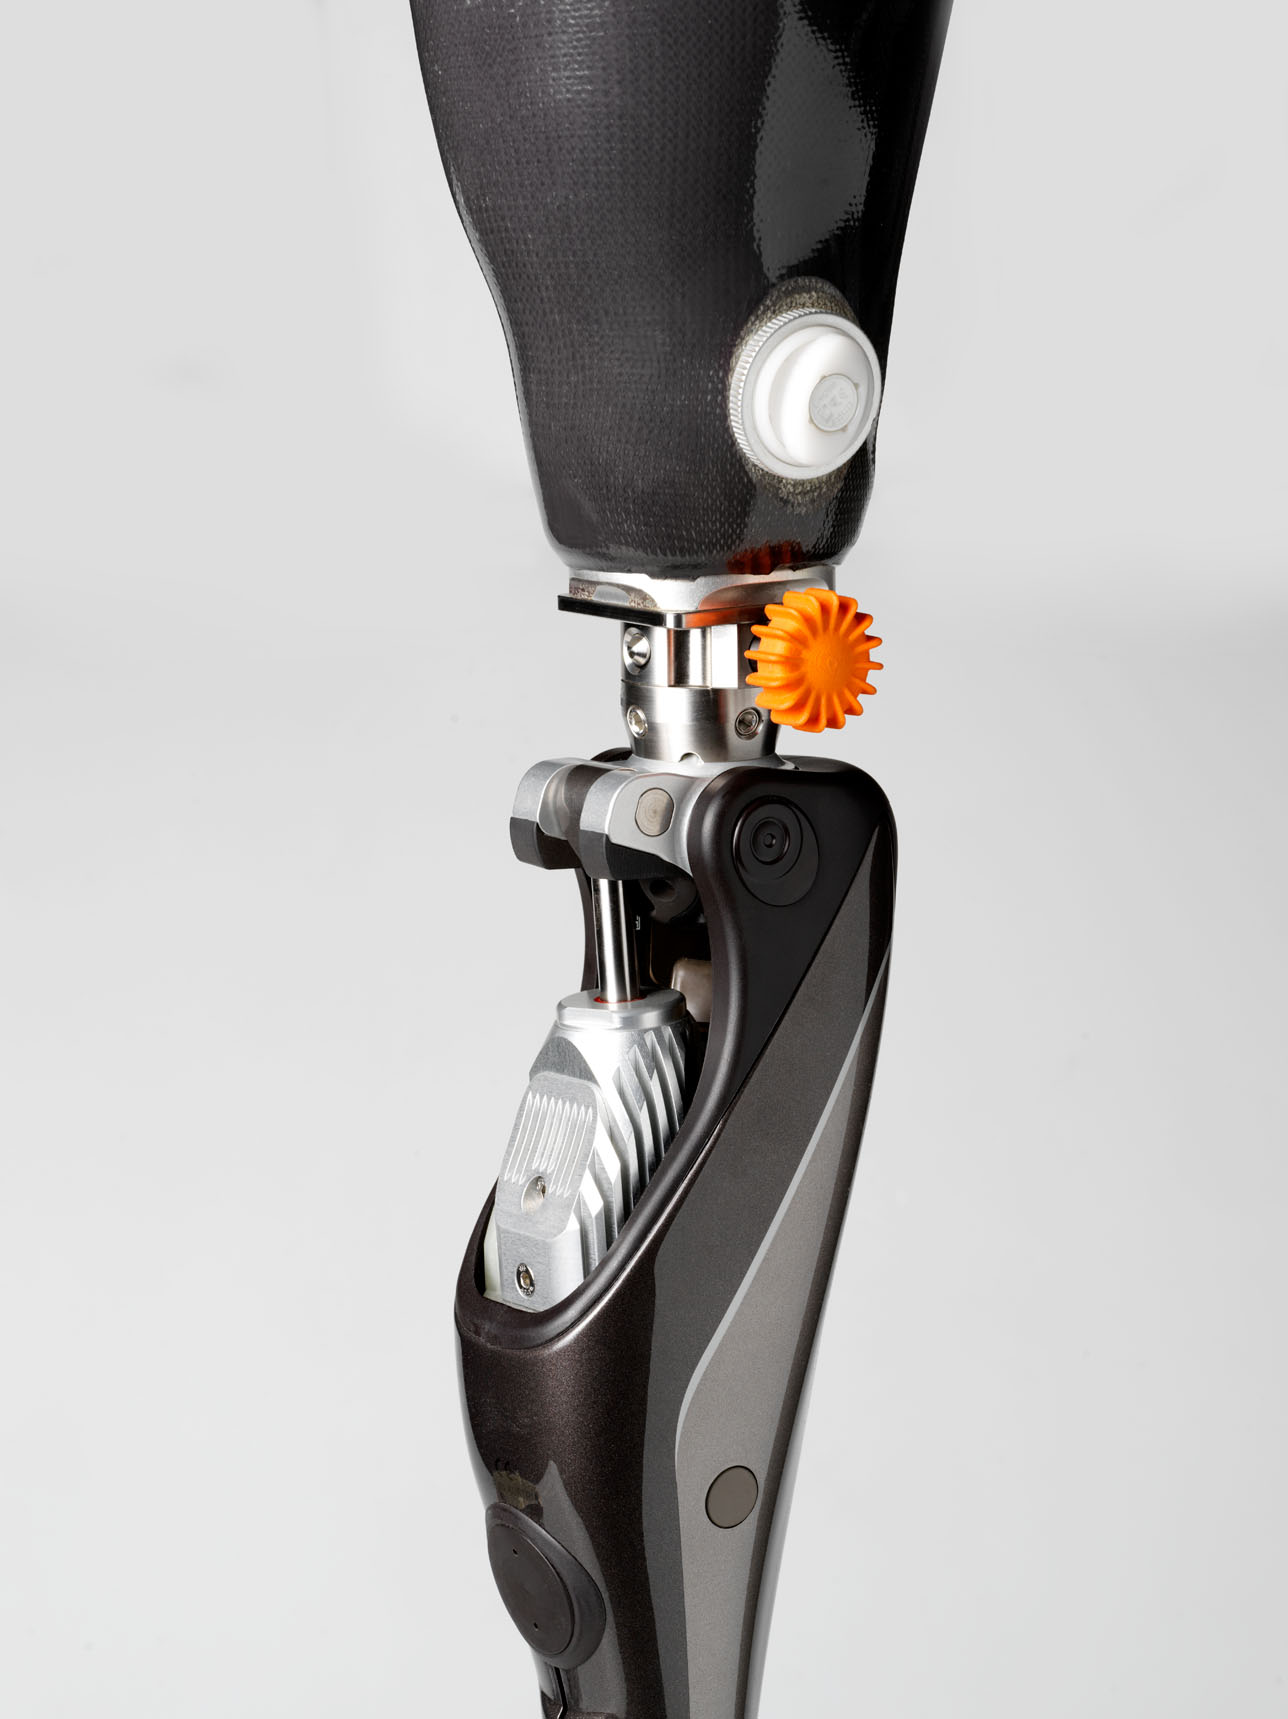 Prosthetic adapter Xtend Connect attached between the socket and the prosthetic knee